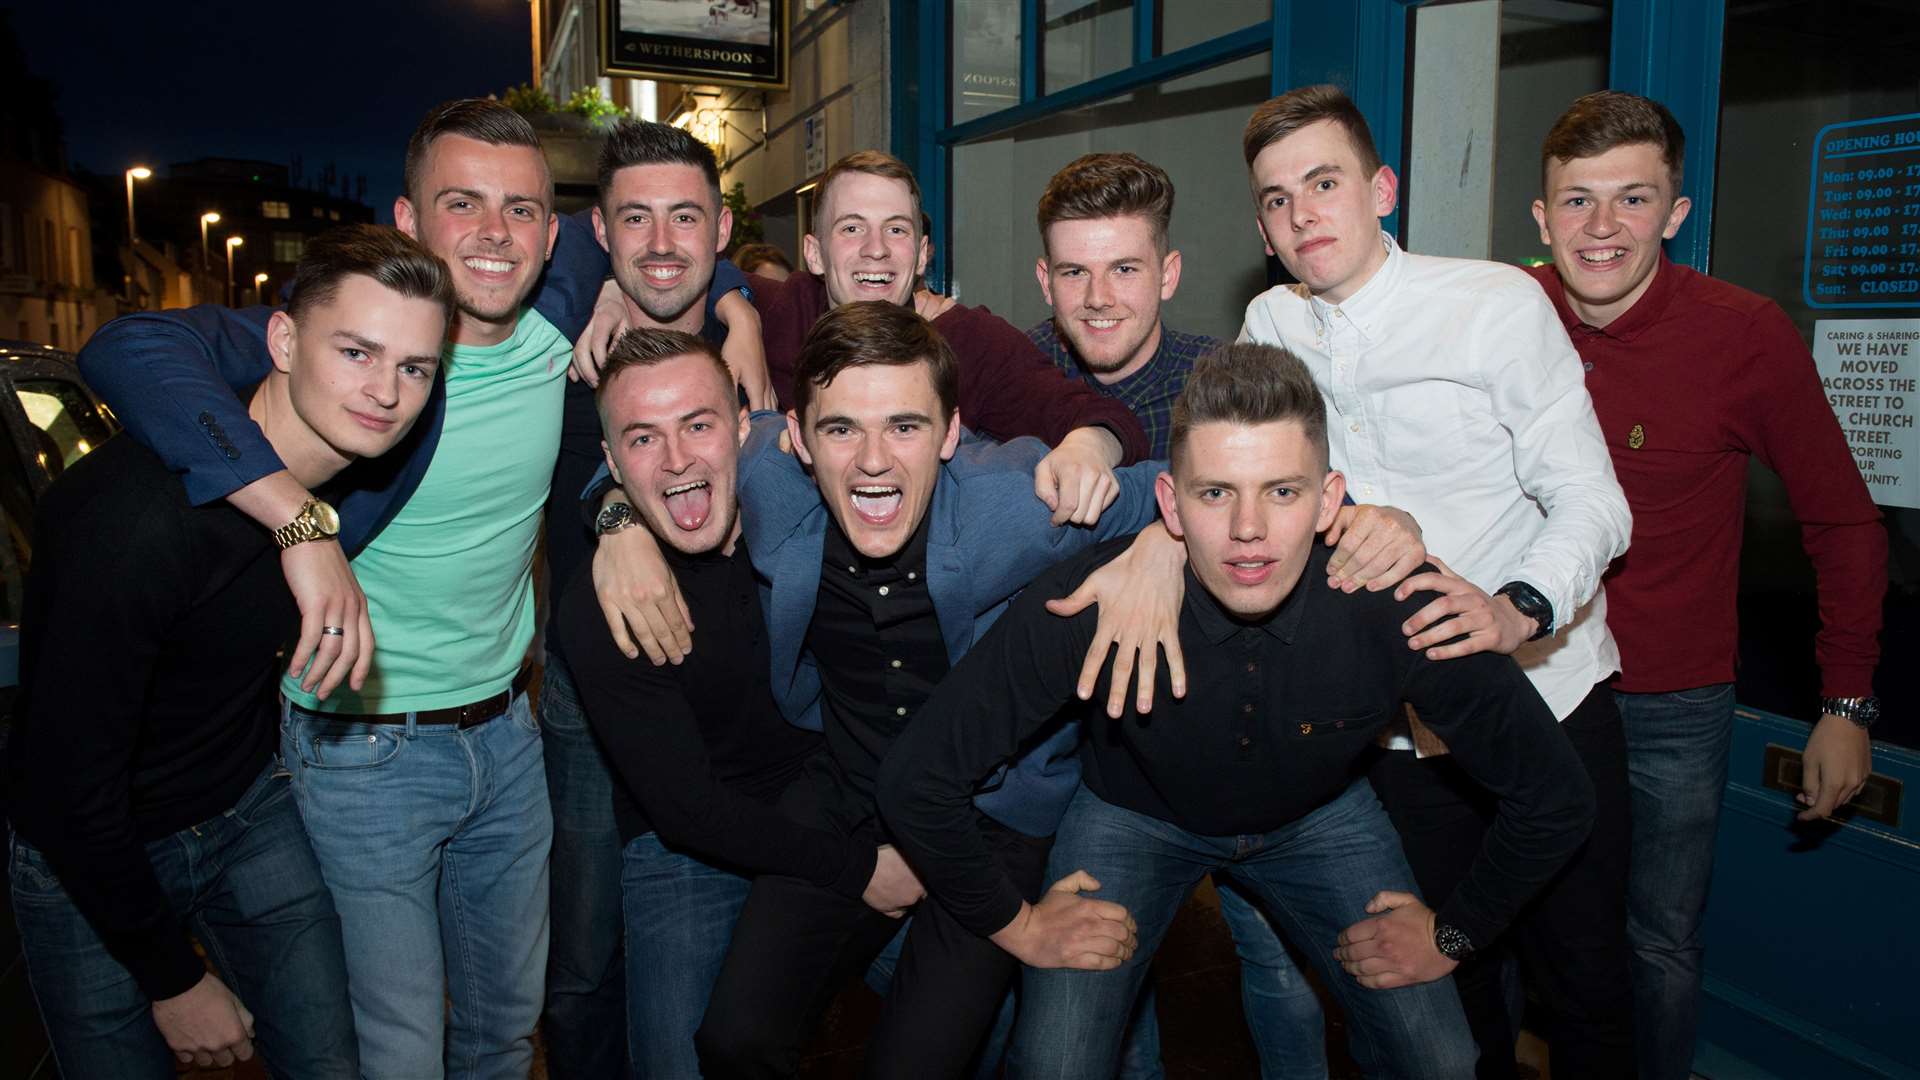 Marty Dey (front, blue jacket) out on his 21st birthday with the lads.